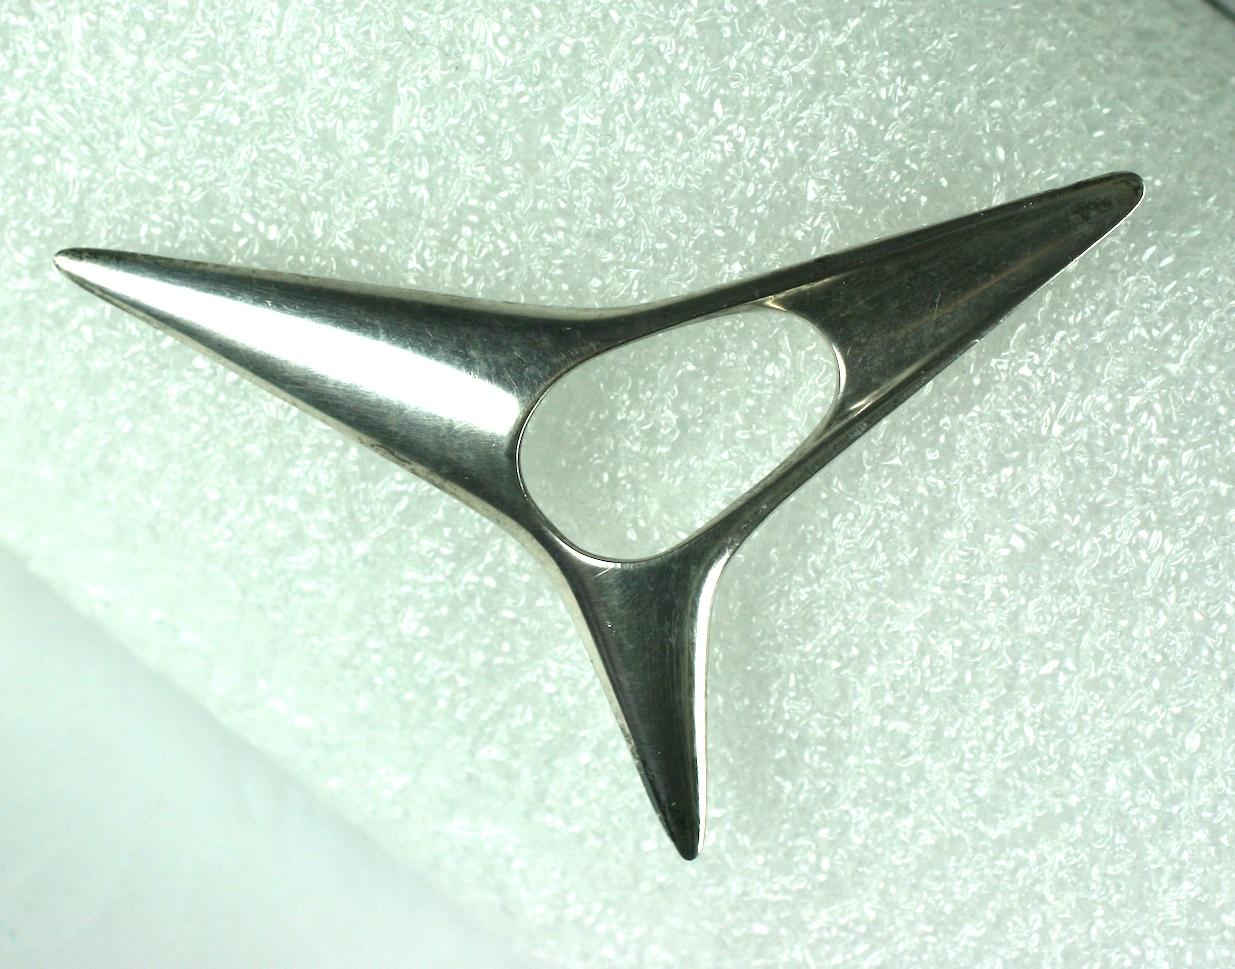 Georg Jensen Atomic Brooch by Henning Koppel. Wonderfully simple, spare but strikingly modern as all his designs are. 
Sterling silver. Signed Jensen, Artist Cipher, model 342. 
Excellent condition. 1960's Denmark.
3